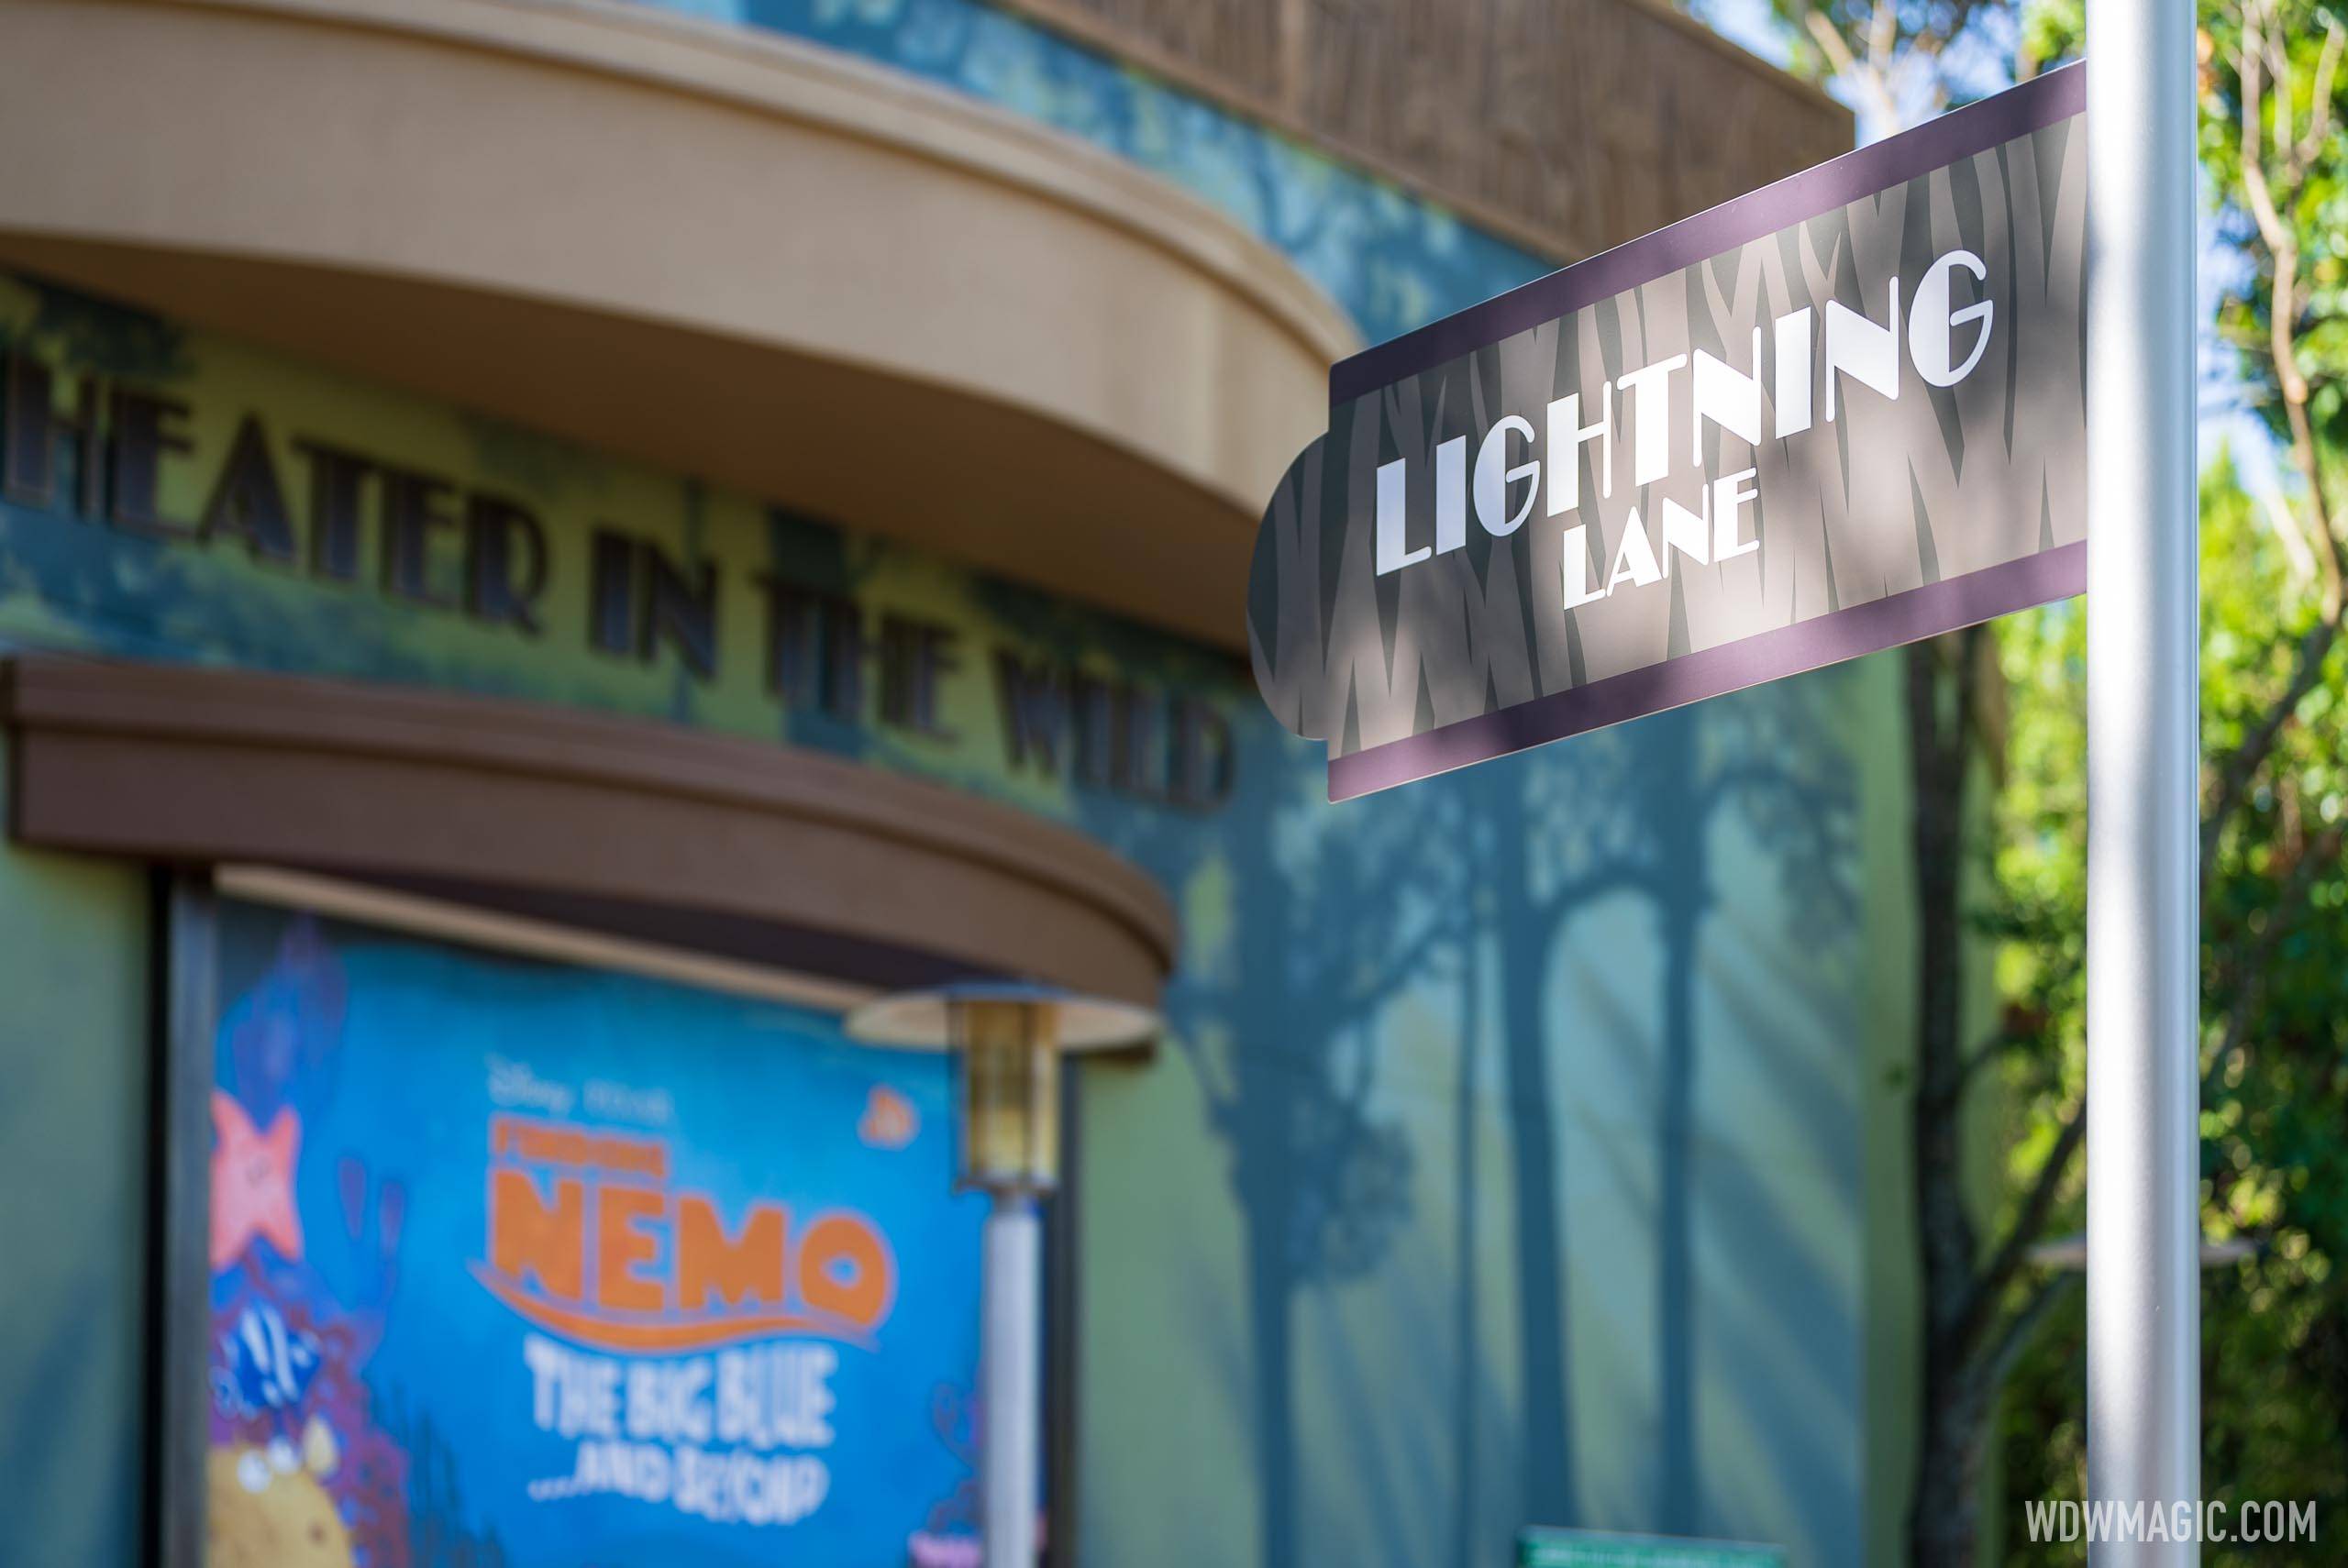 Lightning Lane signage at Theater in the Wild